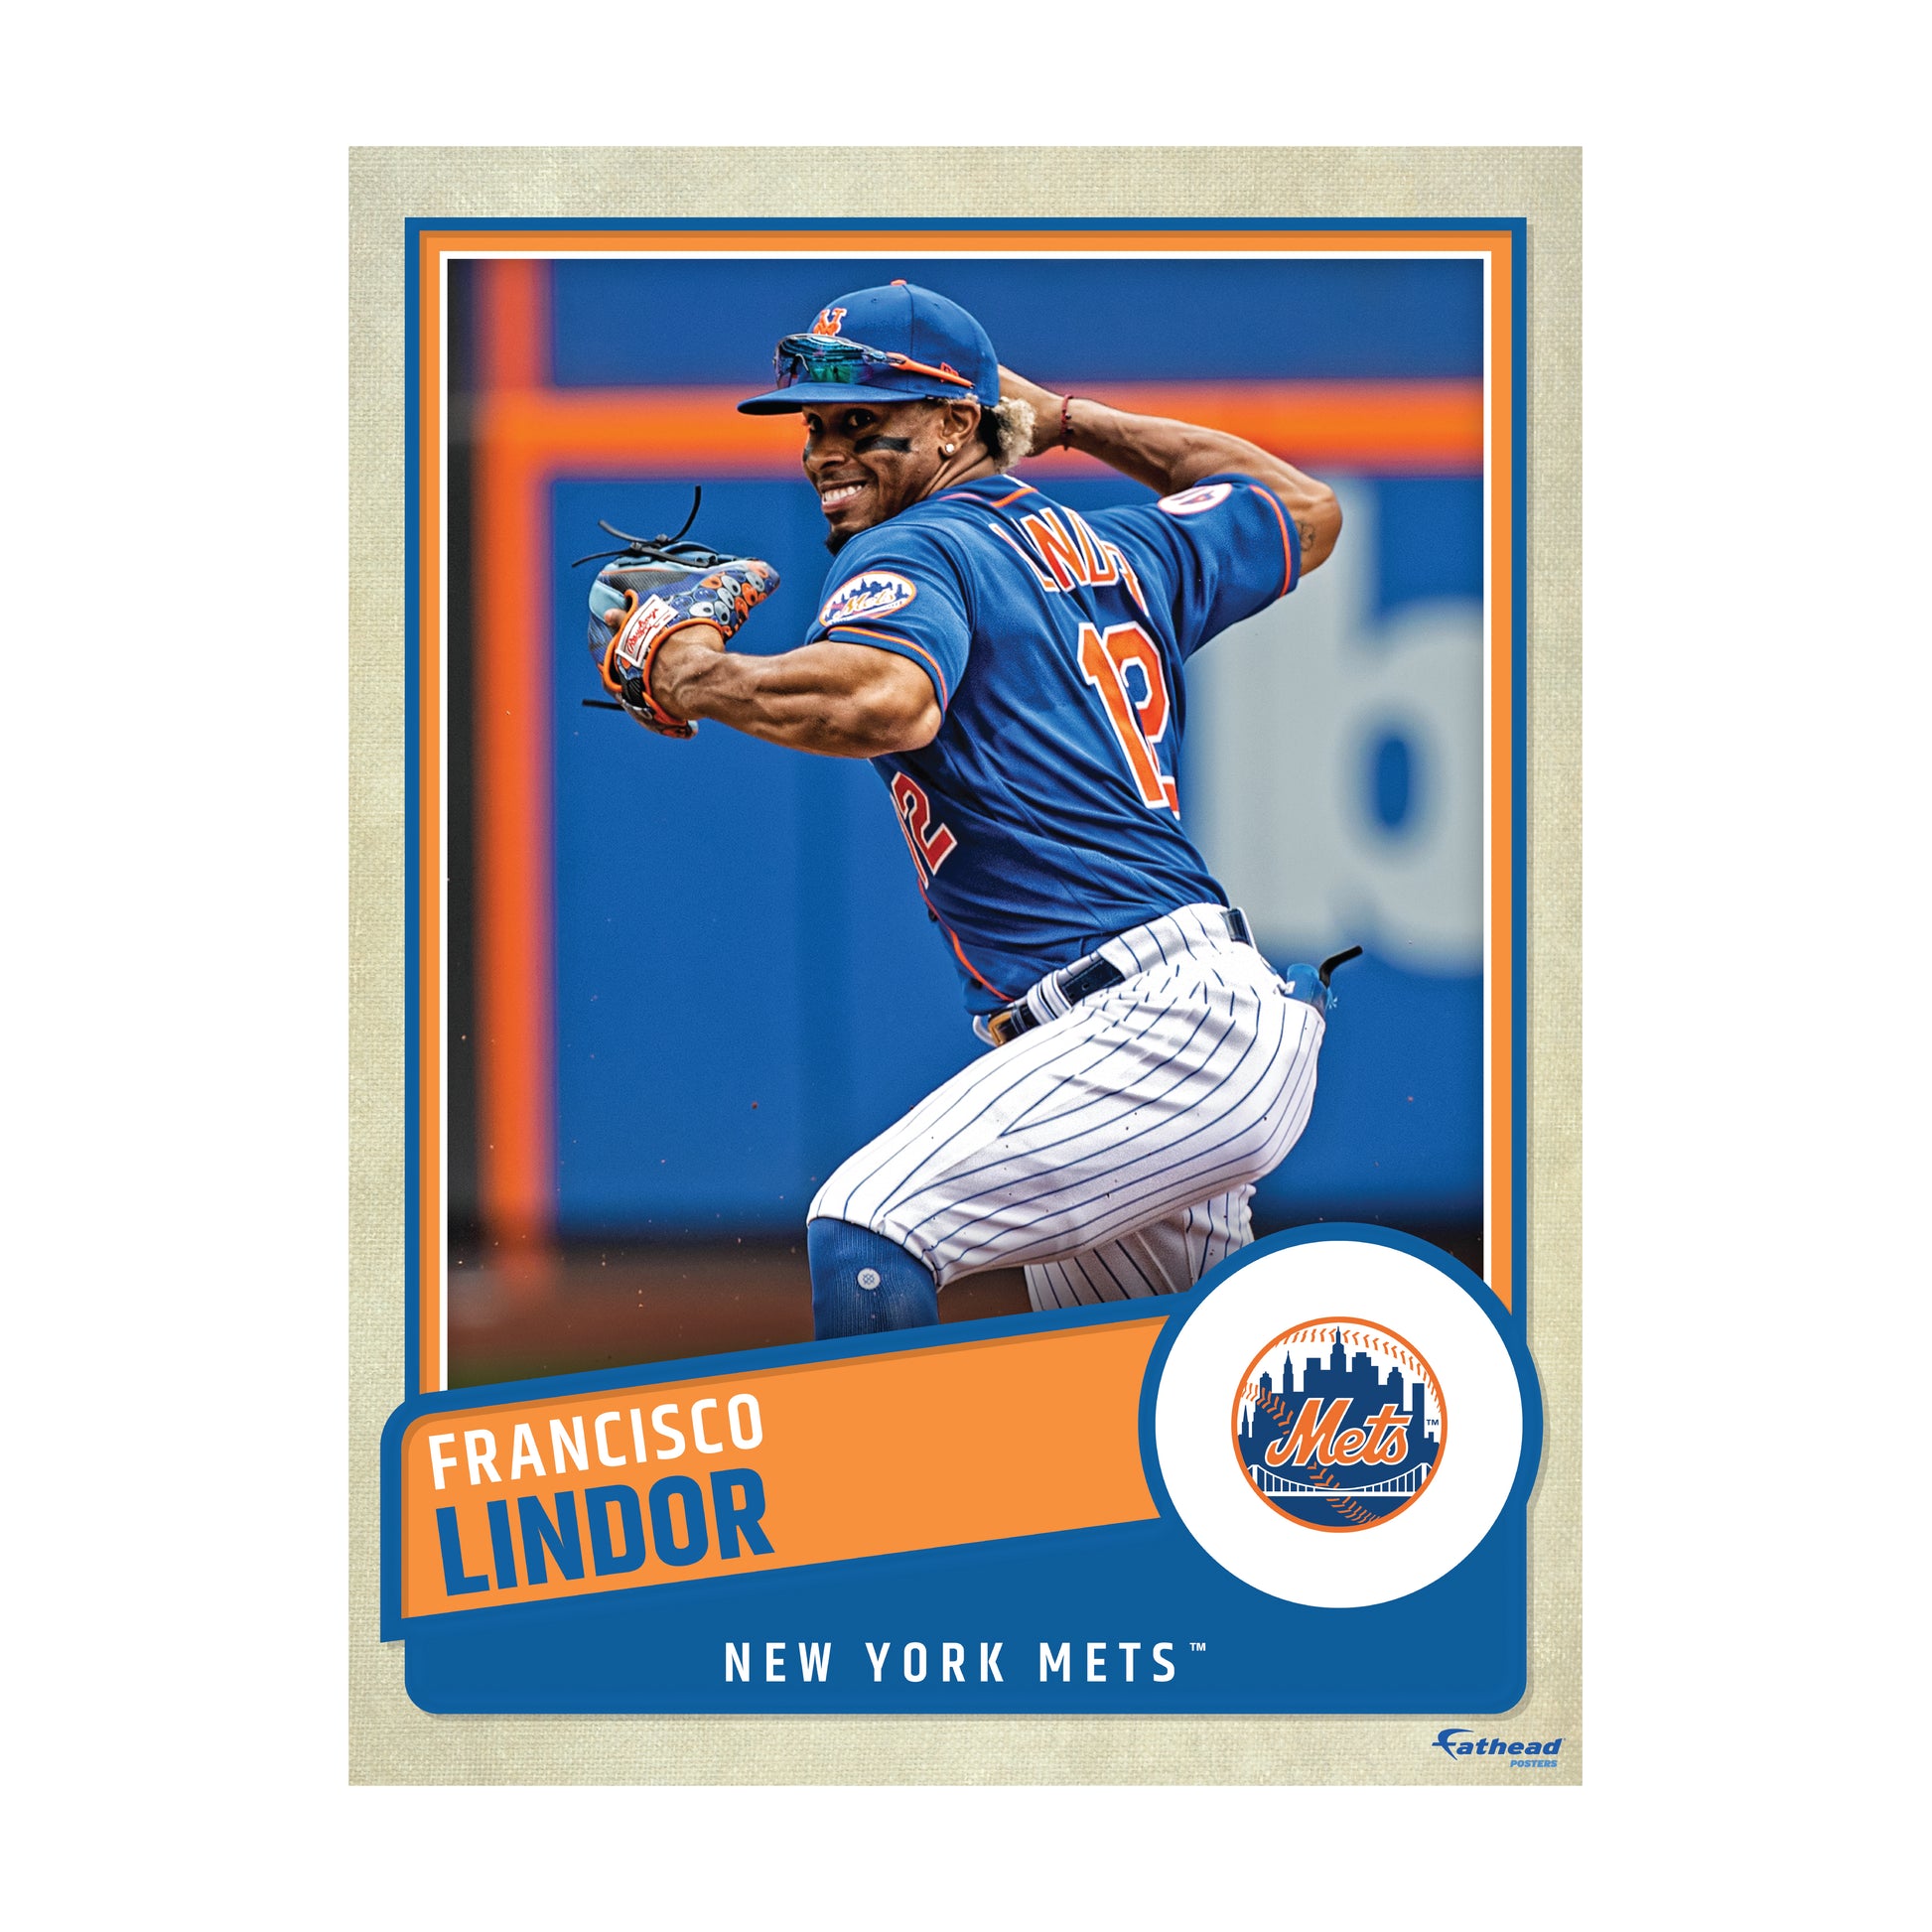 New York Mets: Francisco Lindor 2022 Poster - Officially Licensed